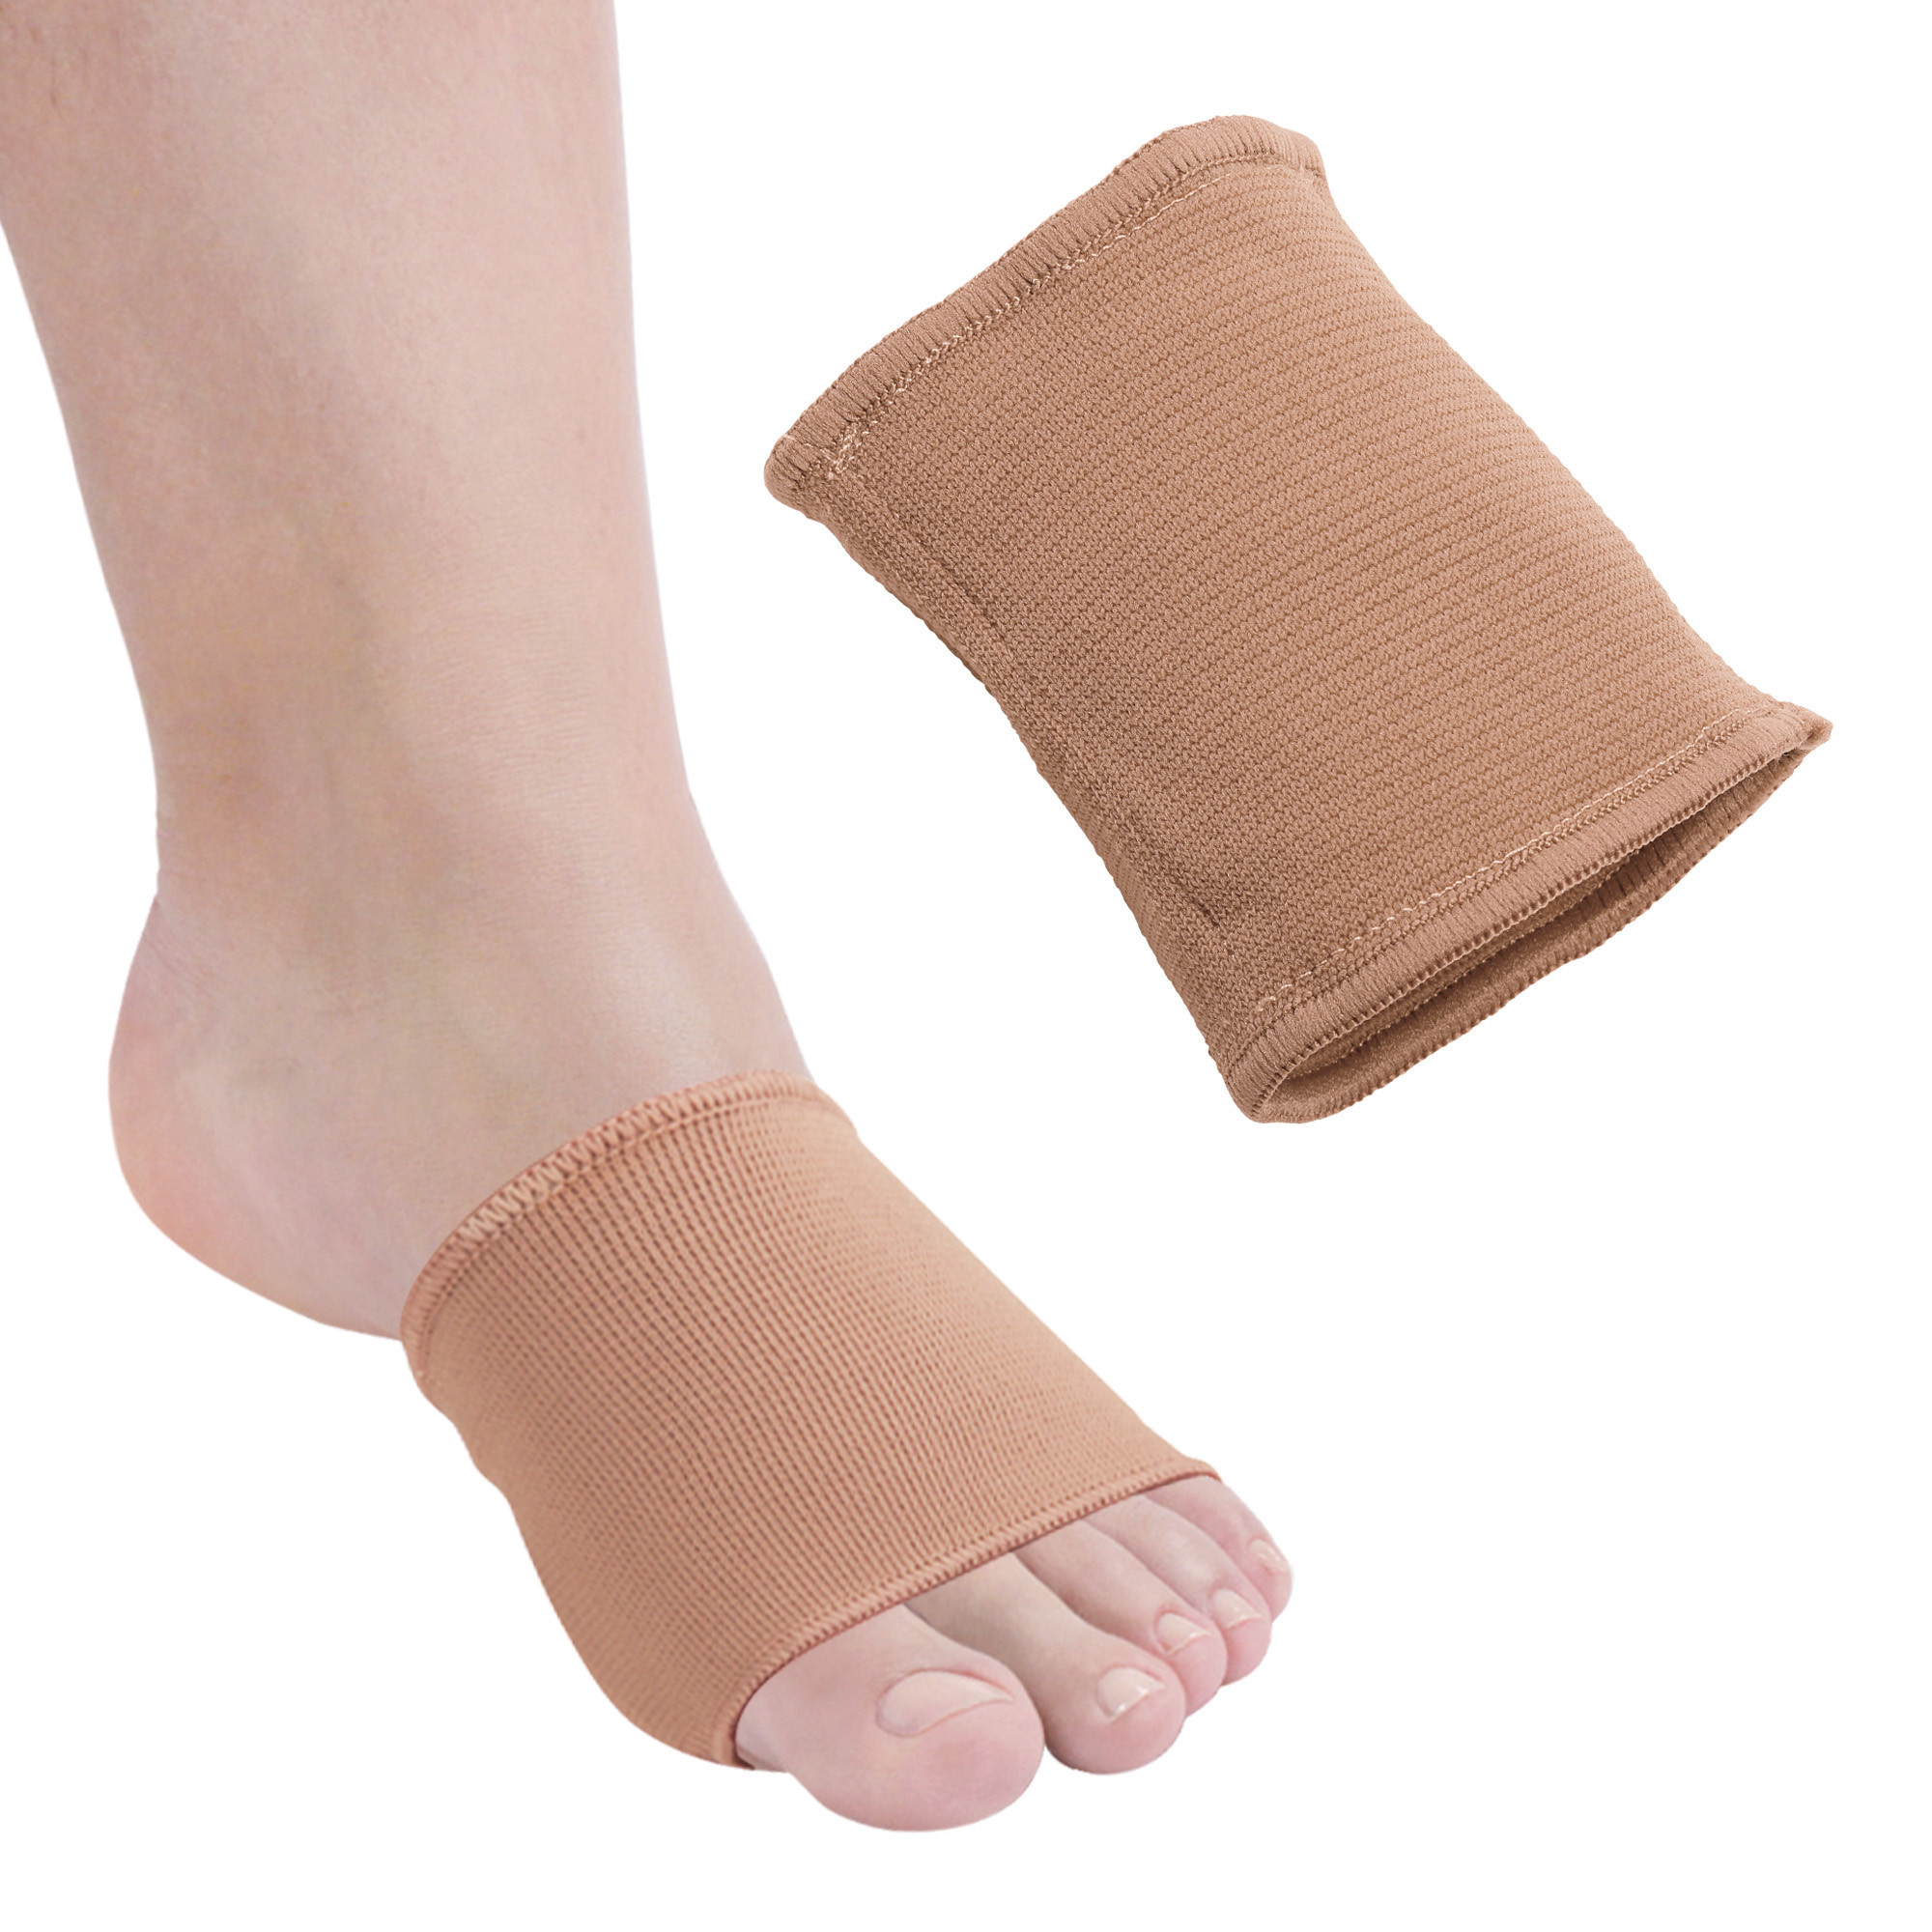 Metatarsal band for feet made of fabric and Tecniwork Polymer Gel